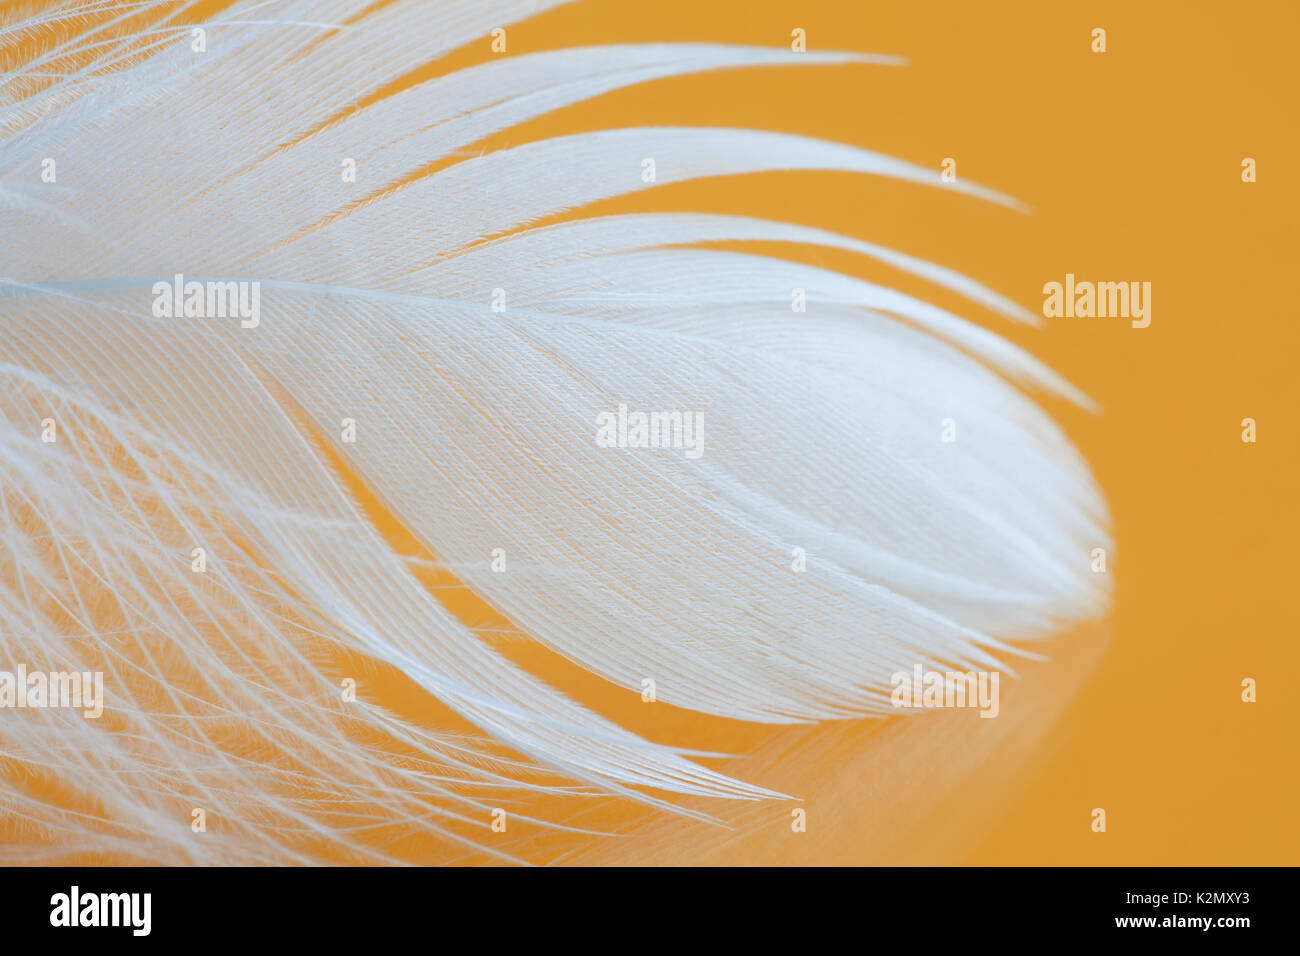 Fluffy white feather texture macro view. Luxury softness concept. Bird plumage feathering on yellow background. Shallow depth of field, soft focus. Stock Photo